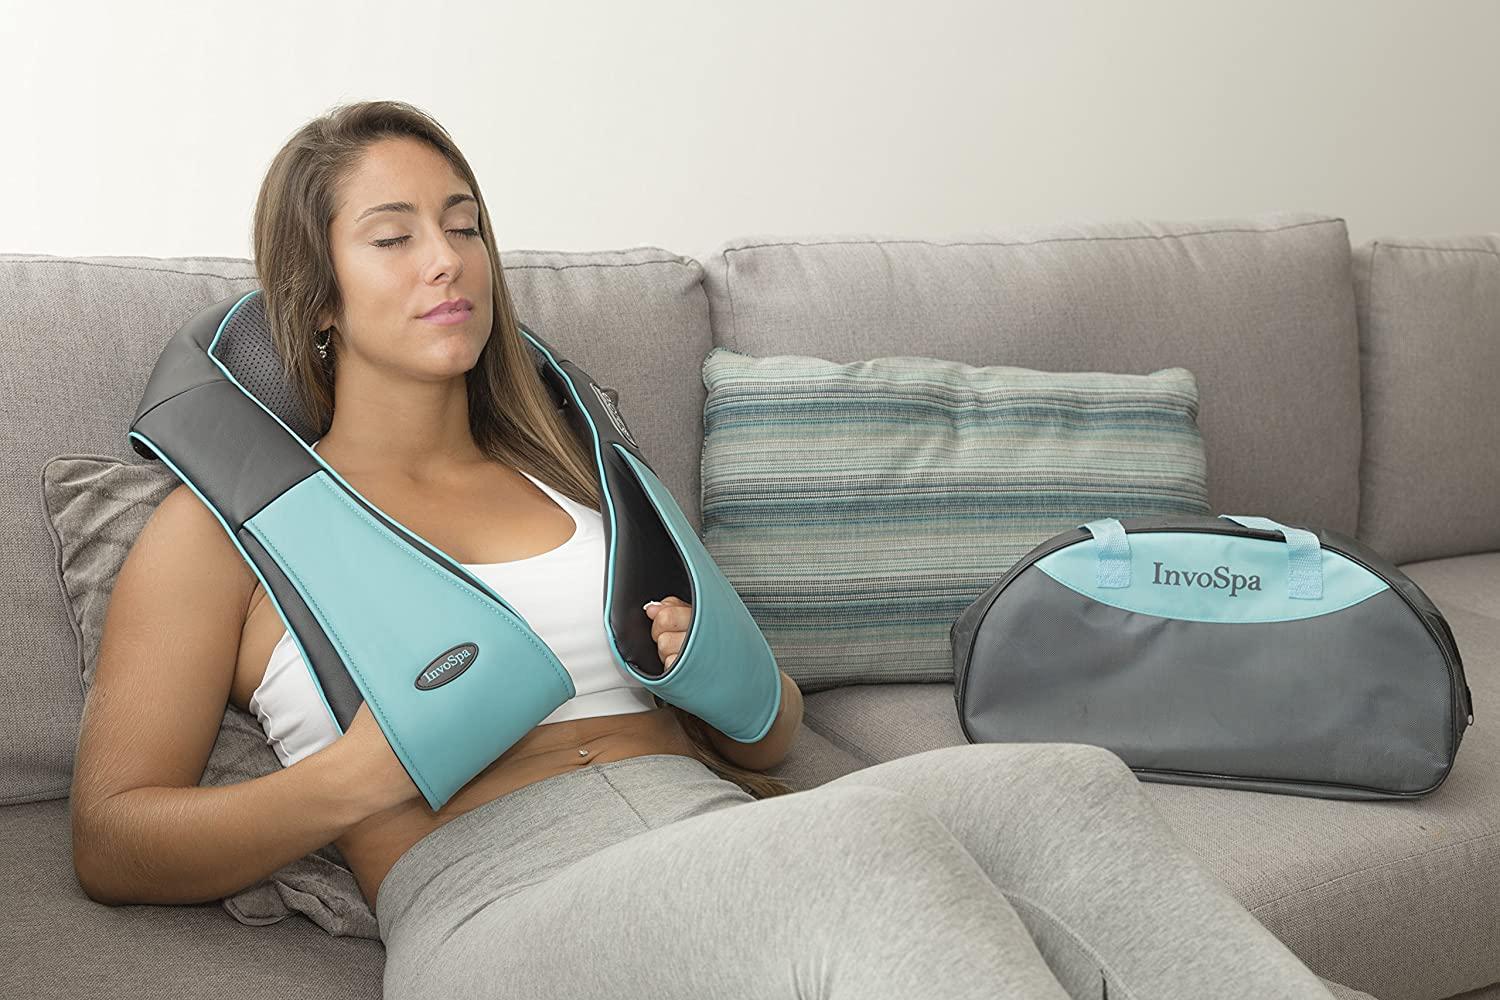 Neck And Shoulder Massager With Heat, Massagers For Neck And Back, Shiatsu  Massage Pillow With 3D Deep Tissue Kneading For Back Shoulder Legs Foot  Body Pain Relief,At Home Office Car, Gift For